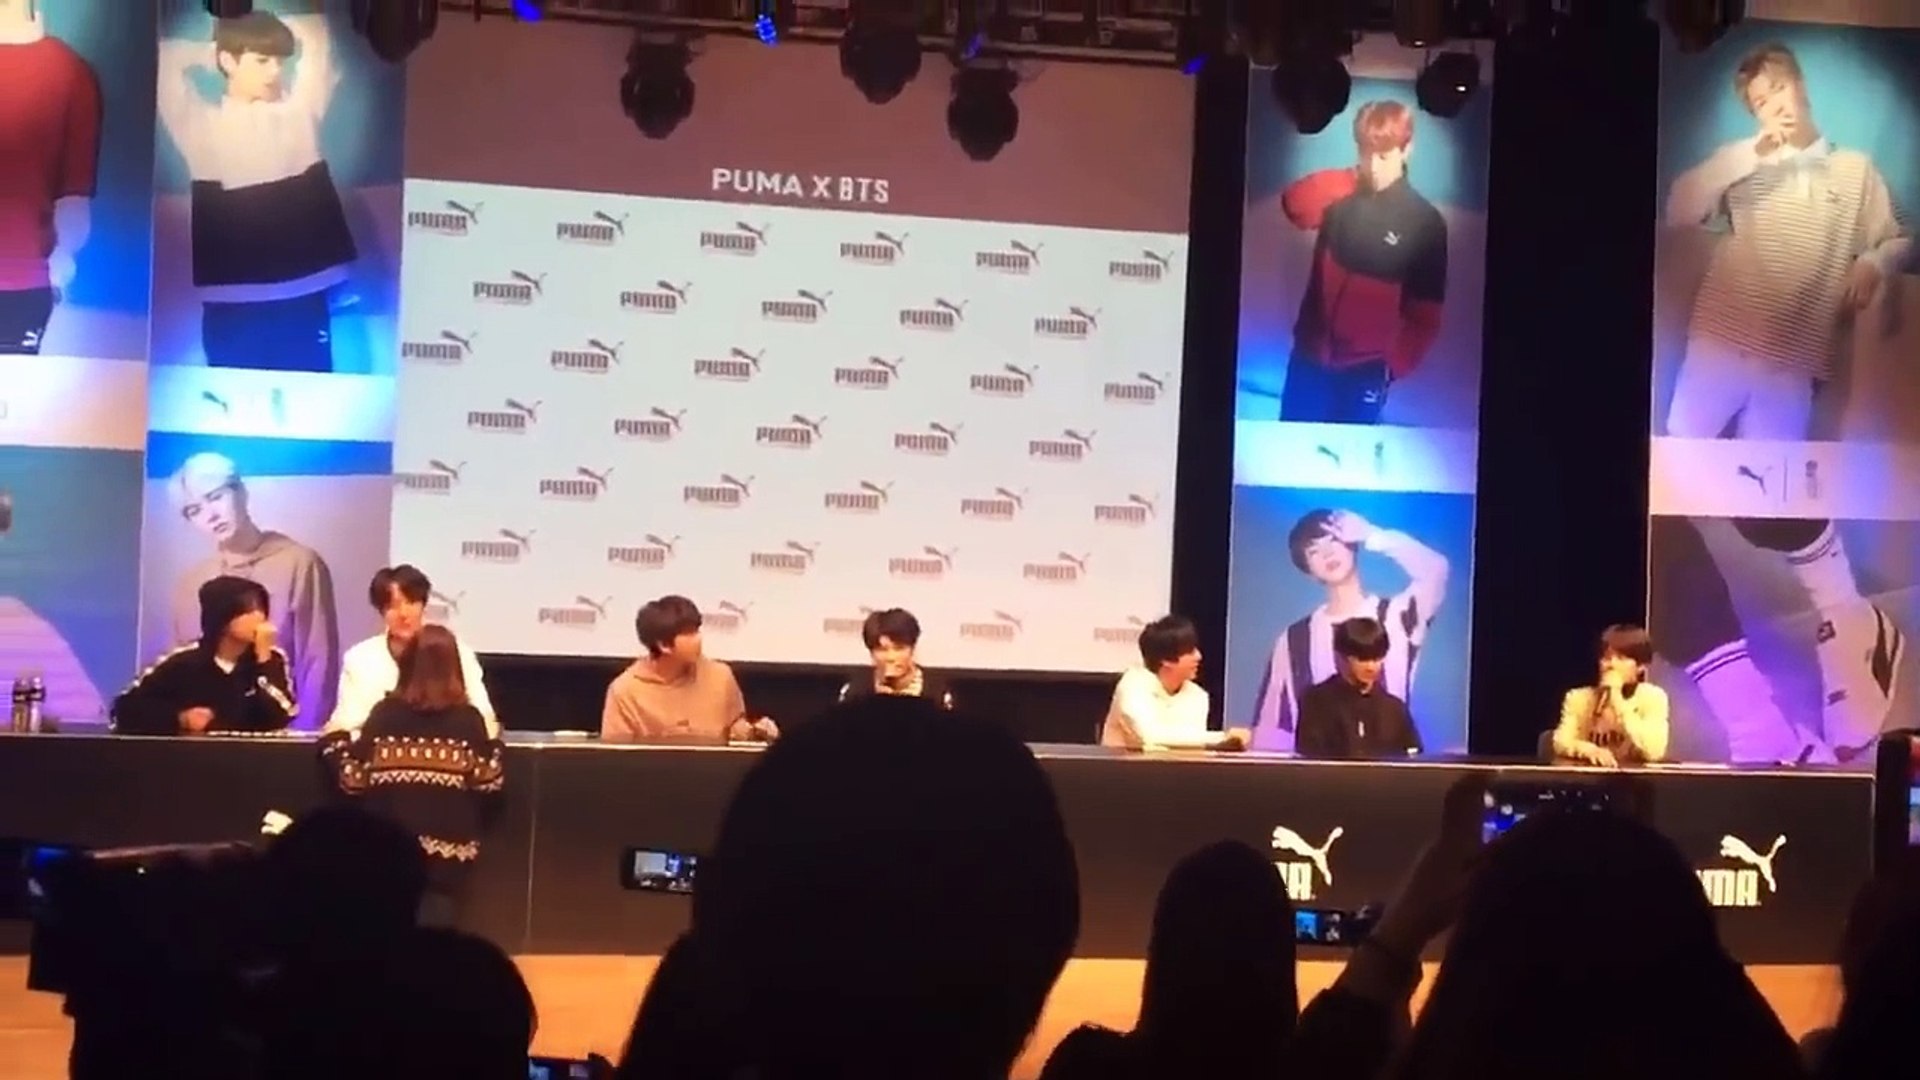 180408 Funny & Cute Moments - PUMA X BTS TURIN Fansign - video Dailymotion